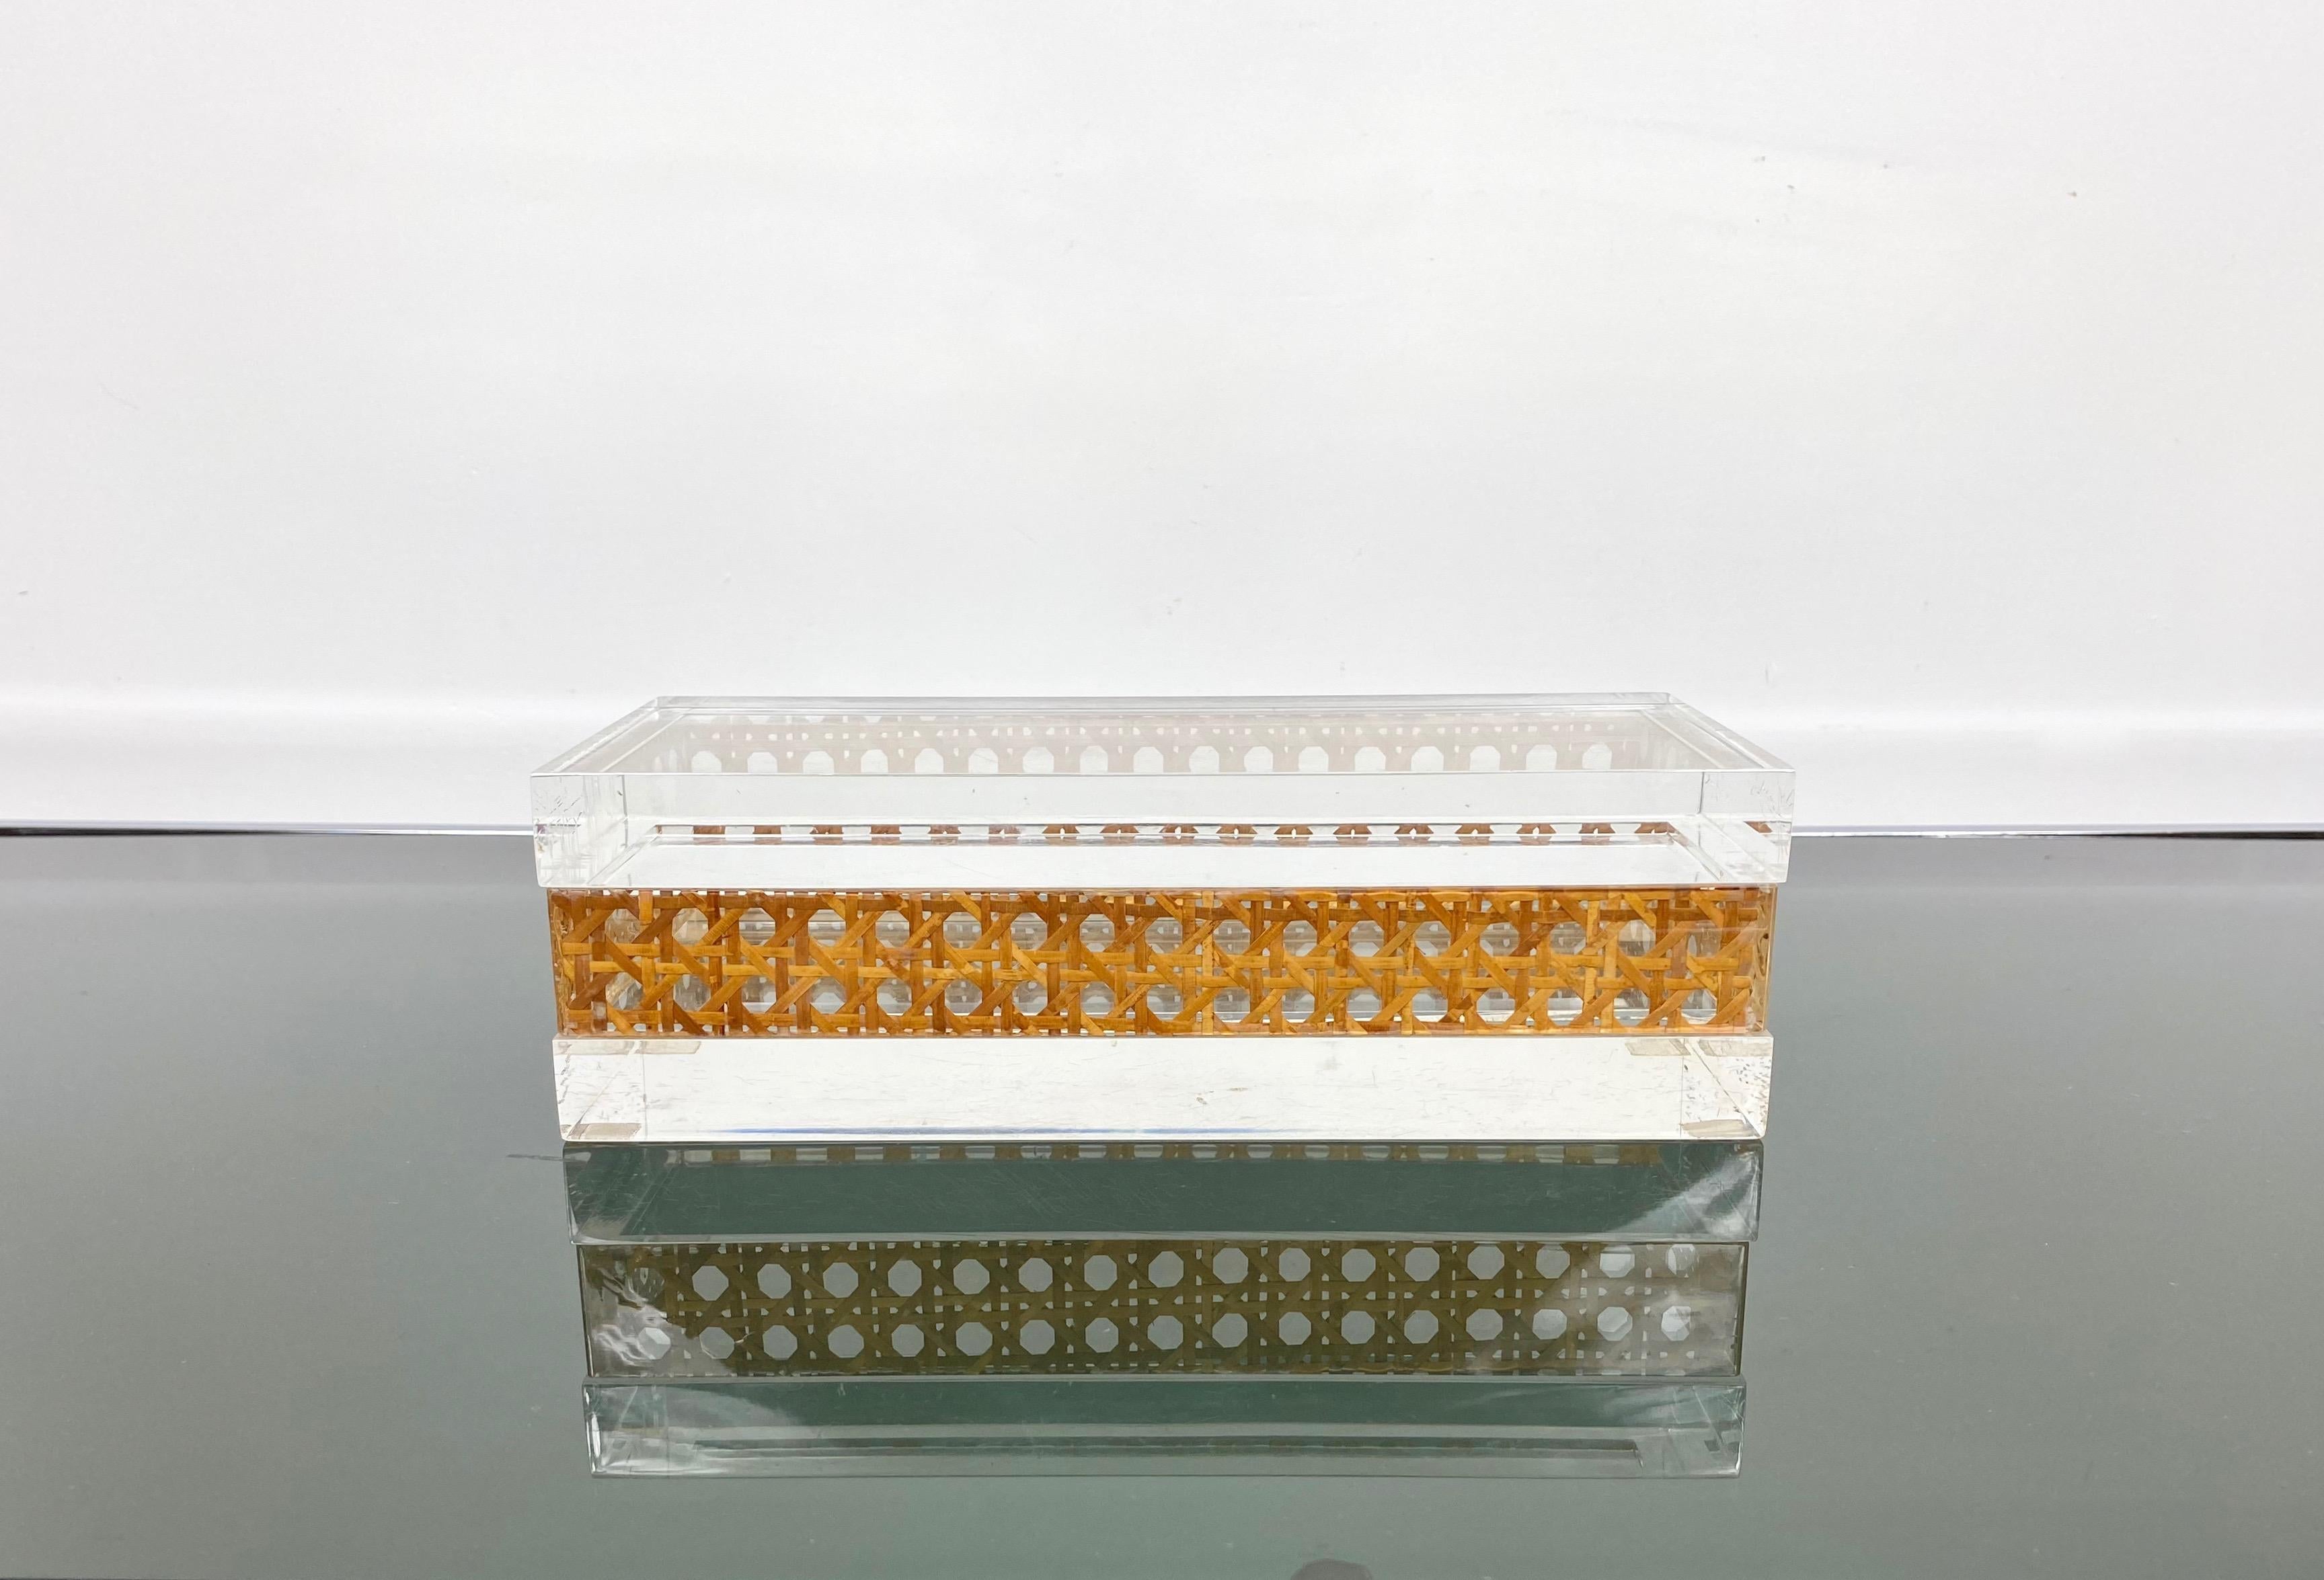 Stunning Mid-Century Modernist Lucite decorative box designed for Christian Dior Home Collection in 1970s. Large rectangular shape with real rattan canework embedded in the crystal clear Lucite. Great accessory for any modern interior.